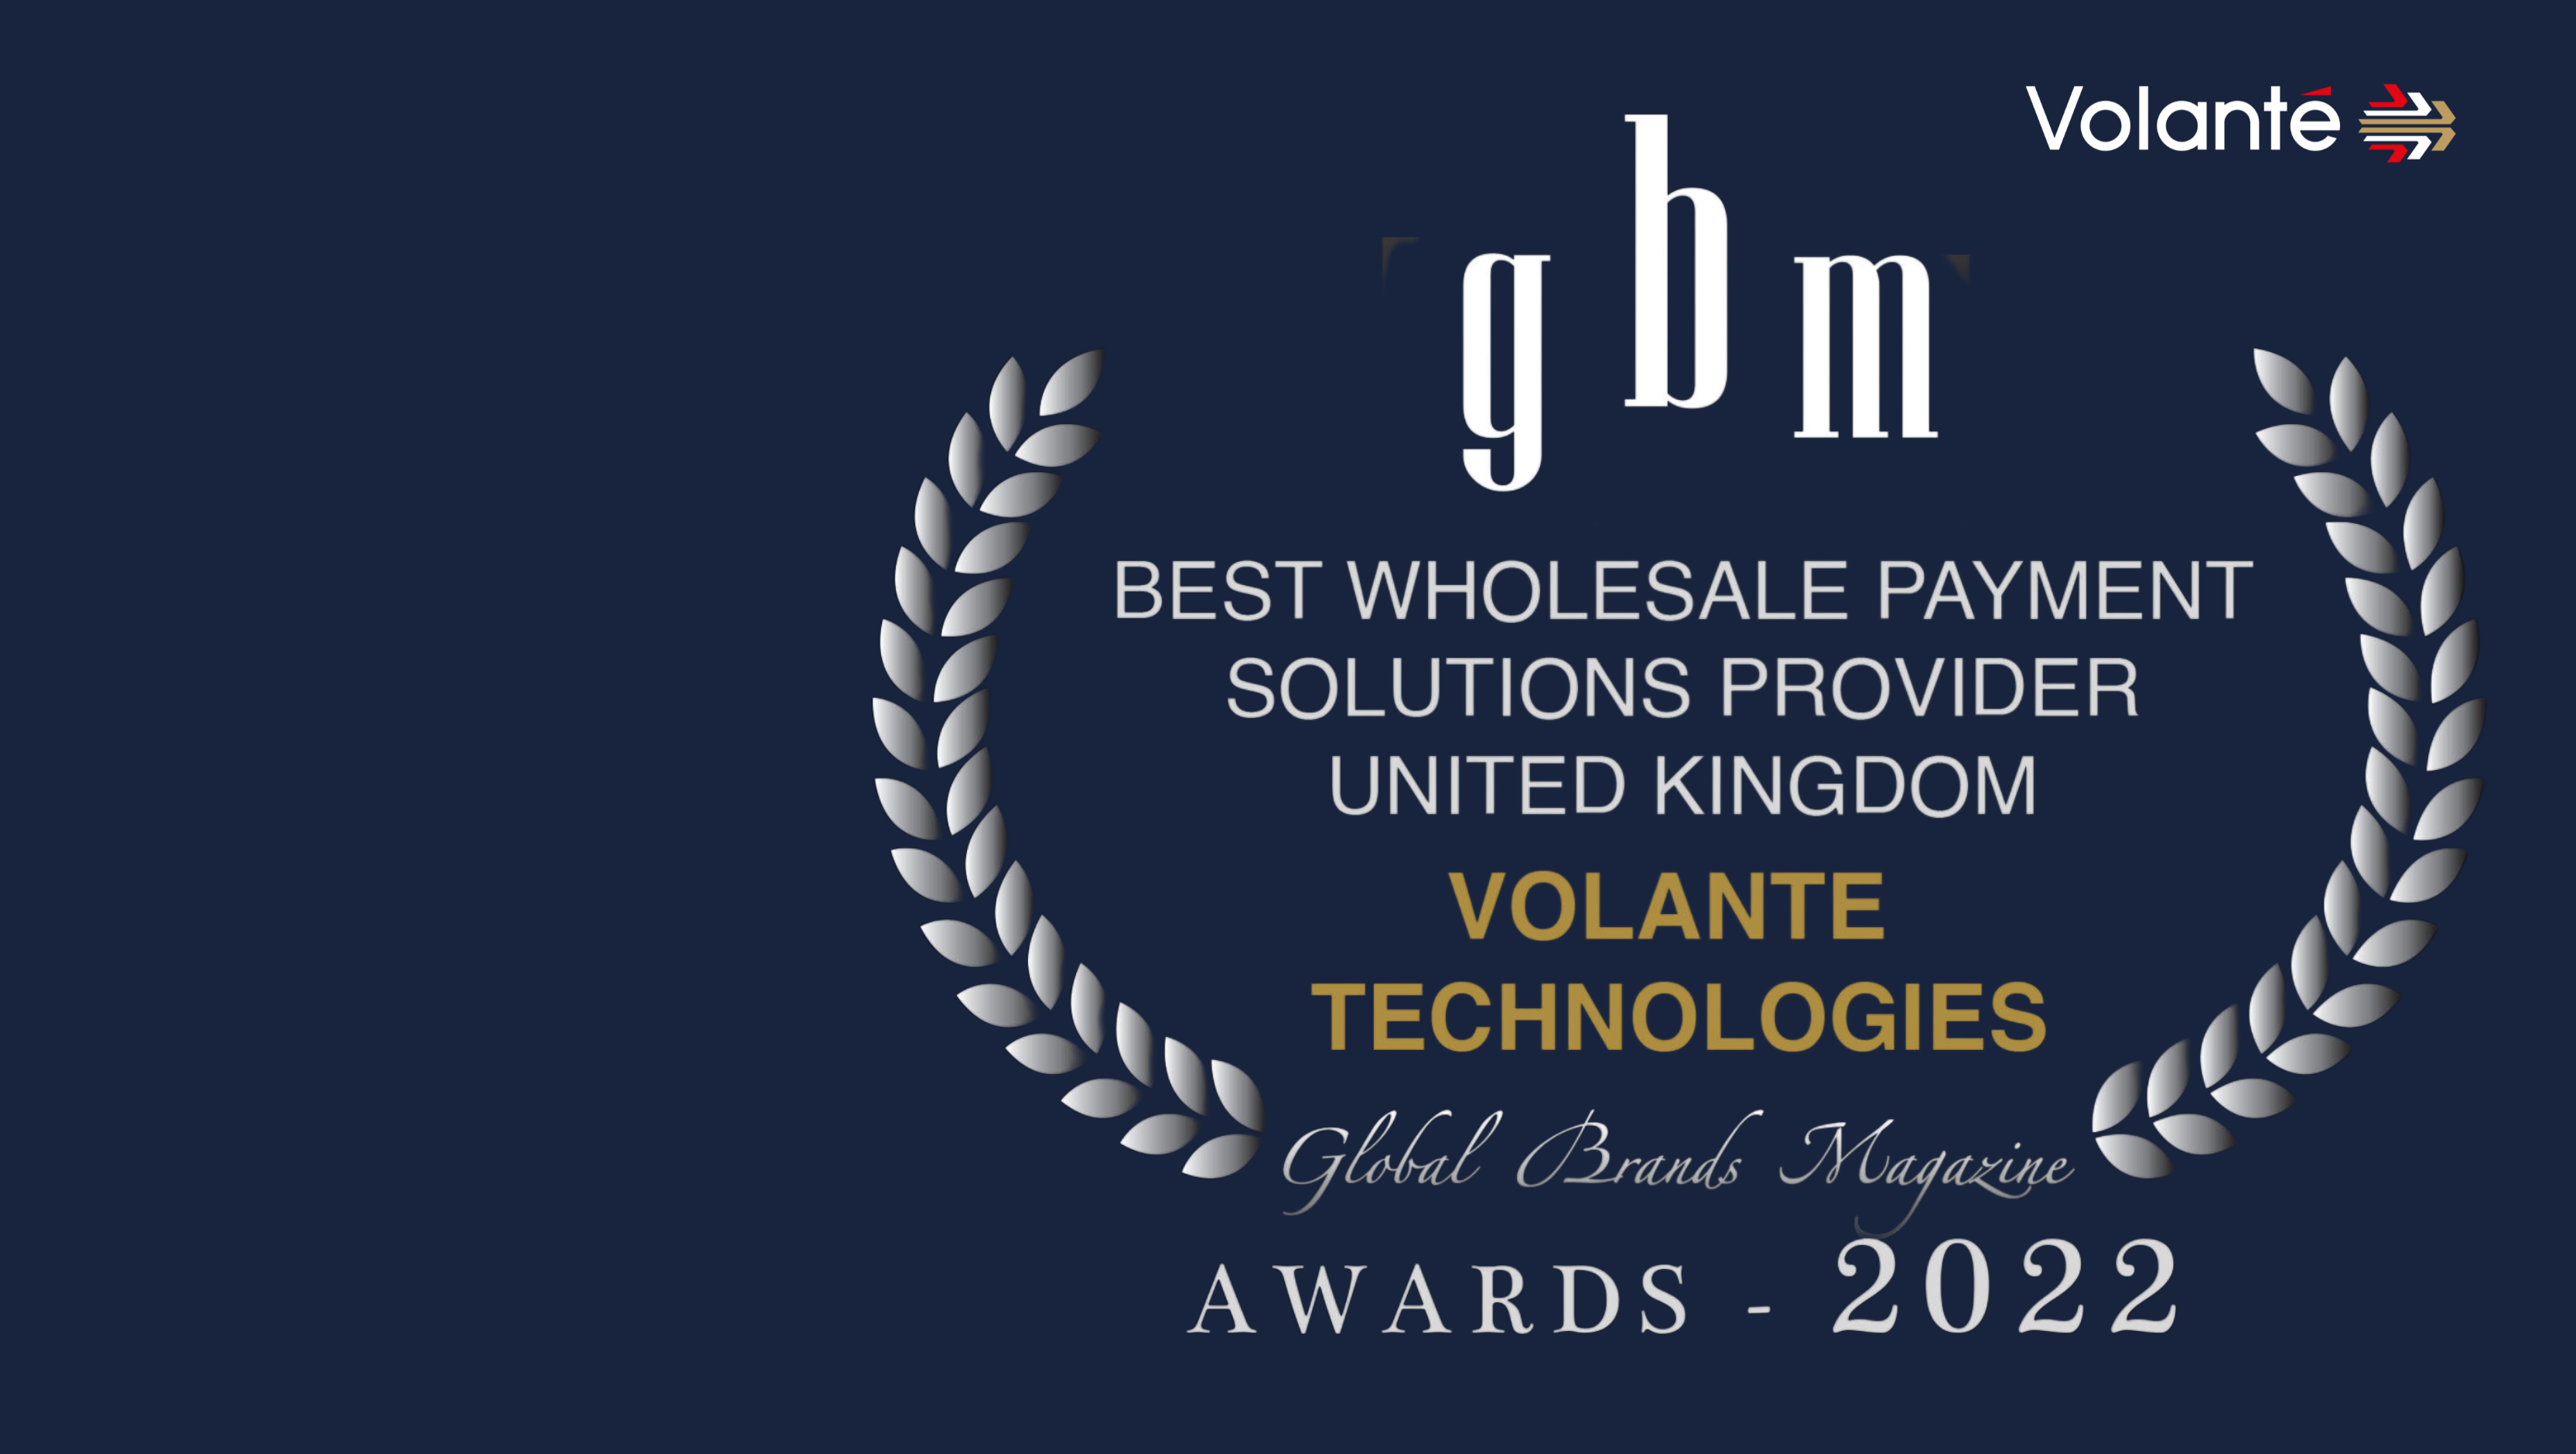 IBS Best Wholesale Payments Award 2022